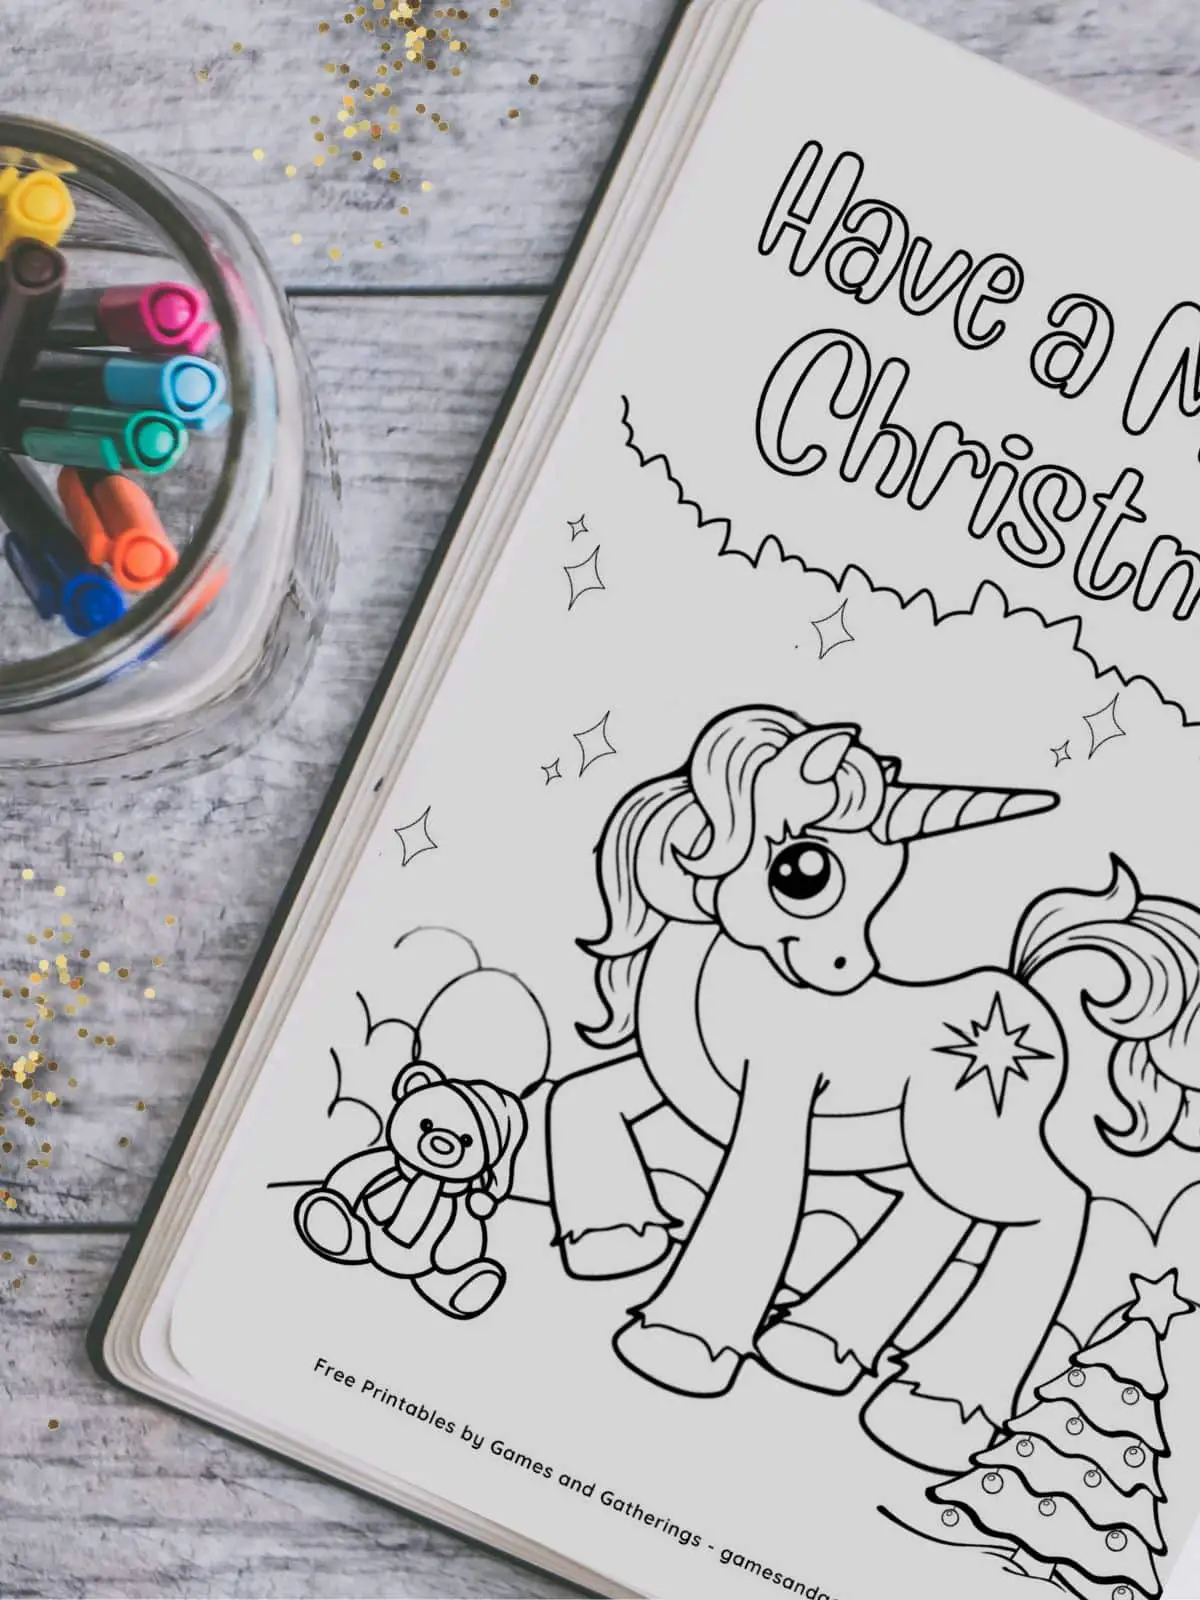 A christmas unicorn coloring book on a table with some colorful markers and gold glitter.